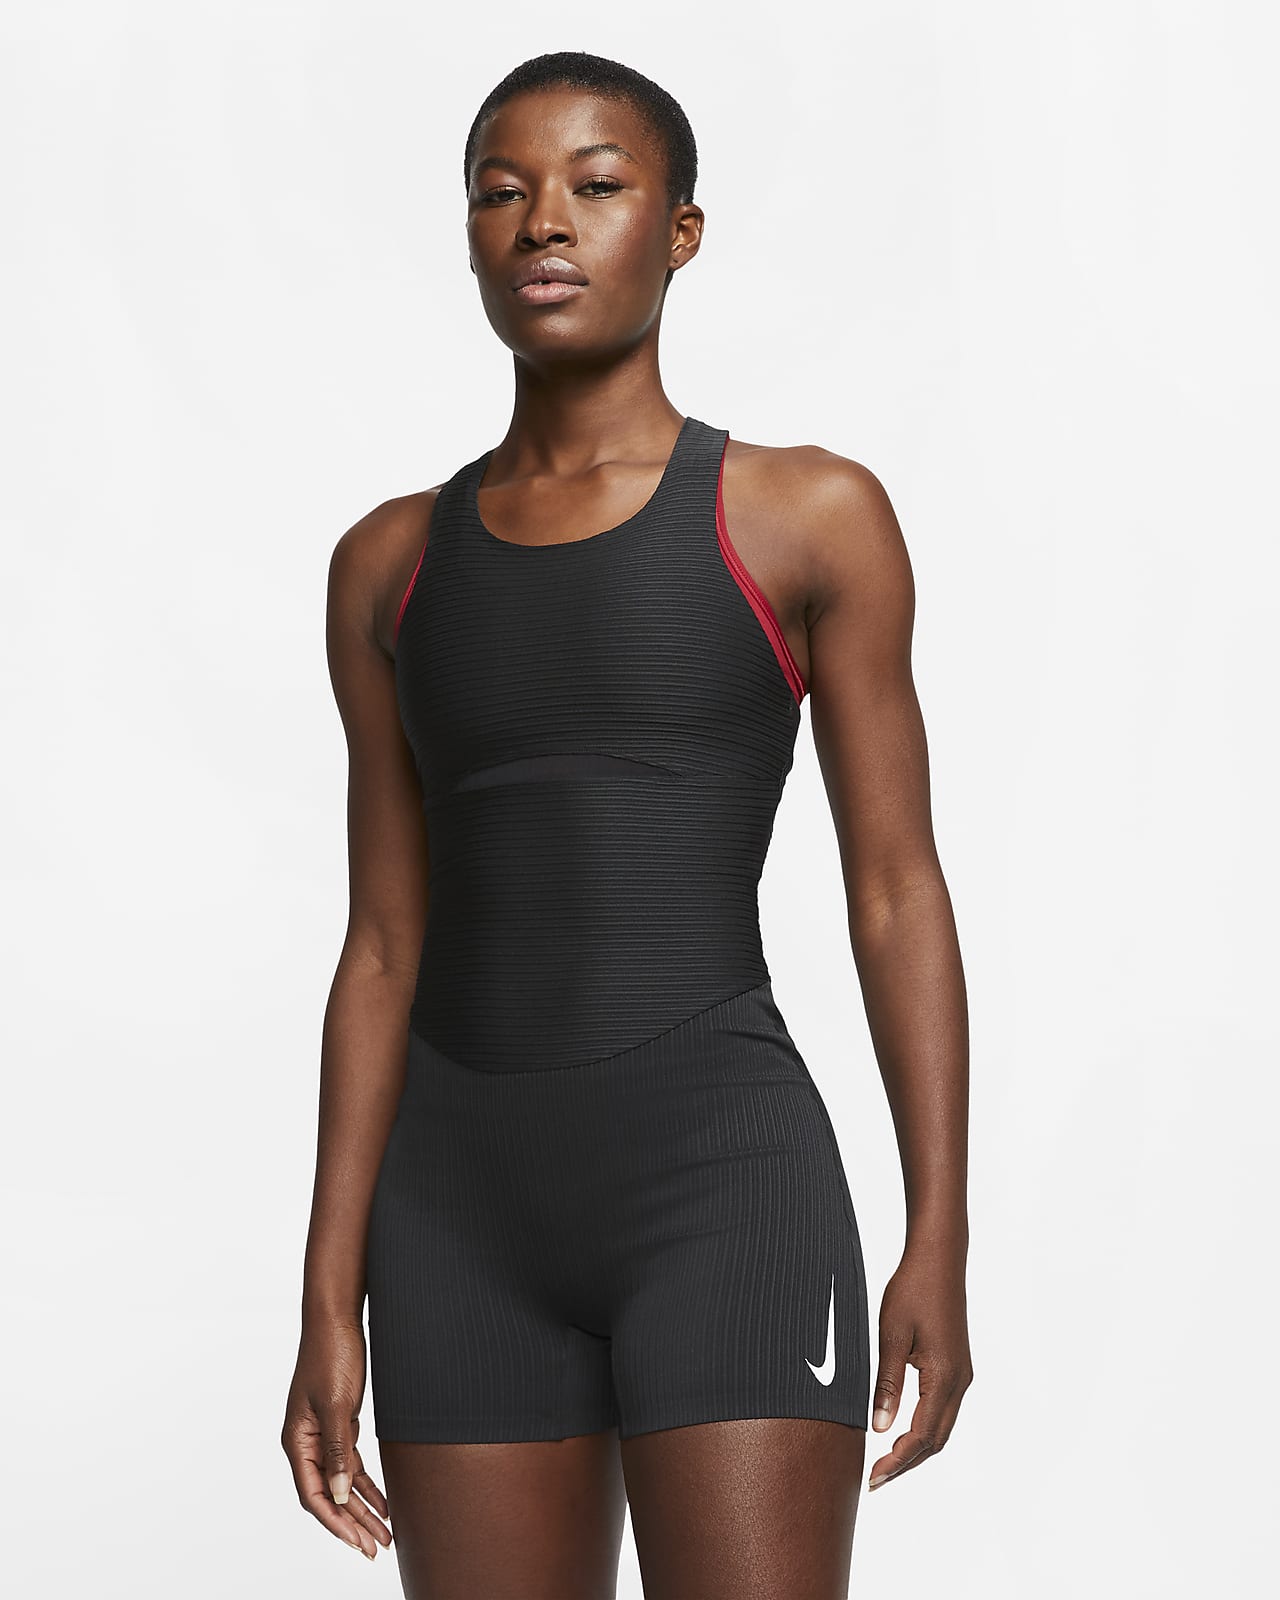 track outfit nike